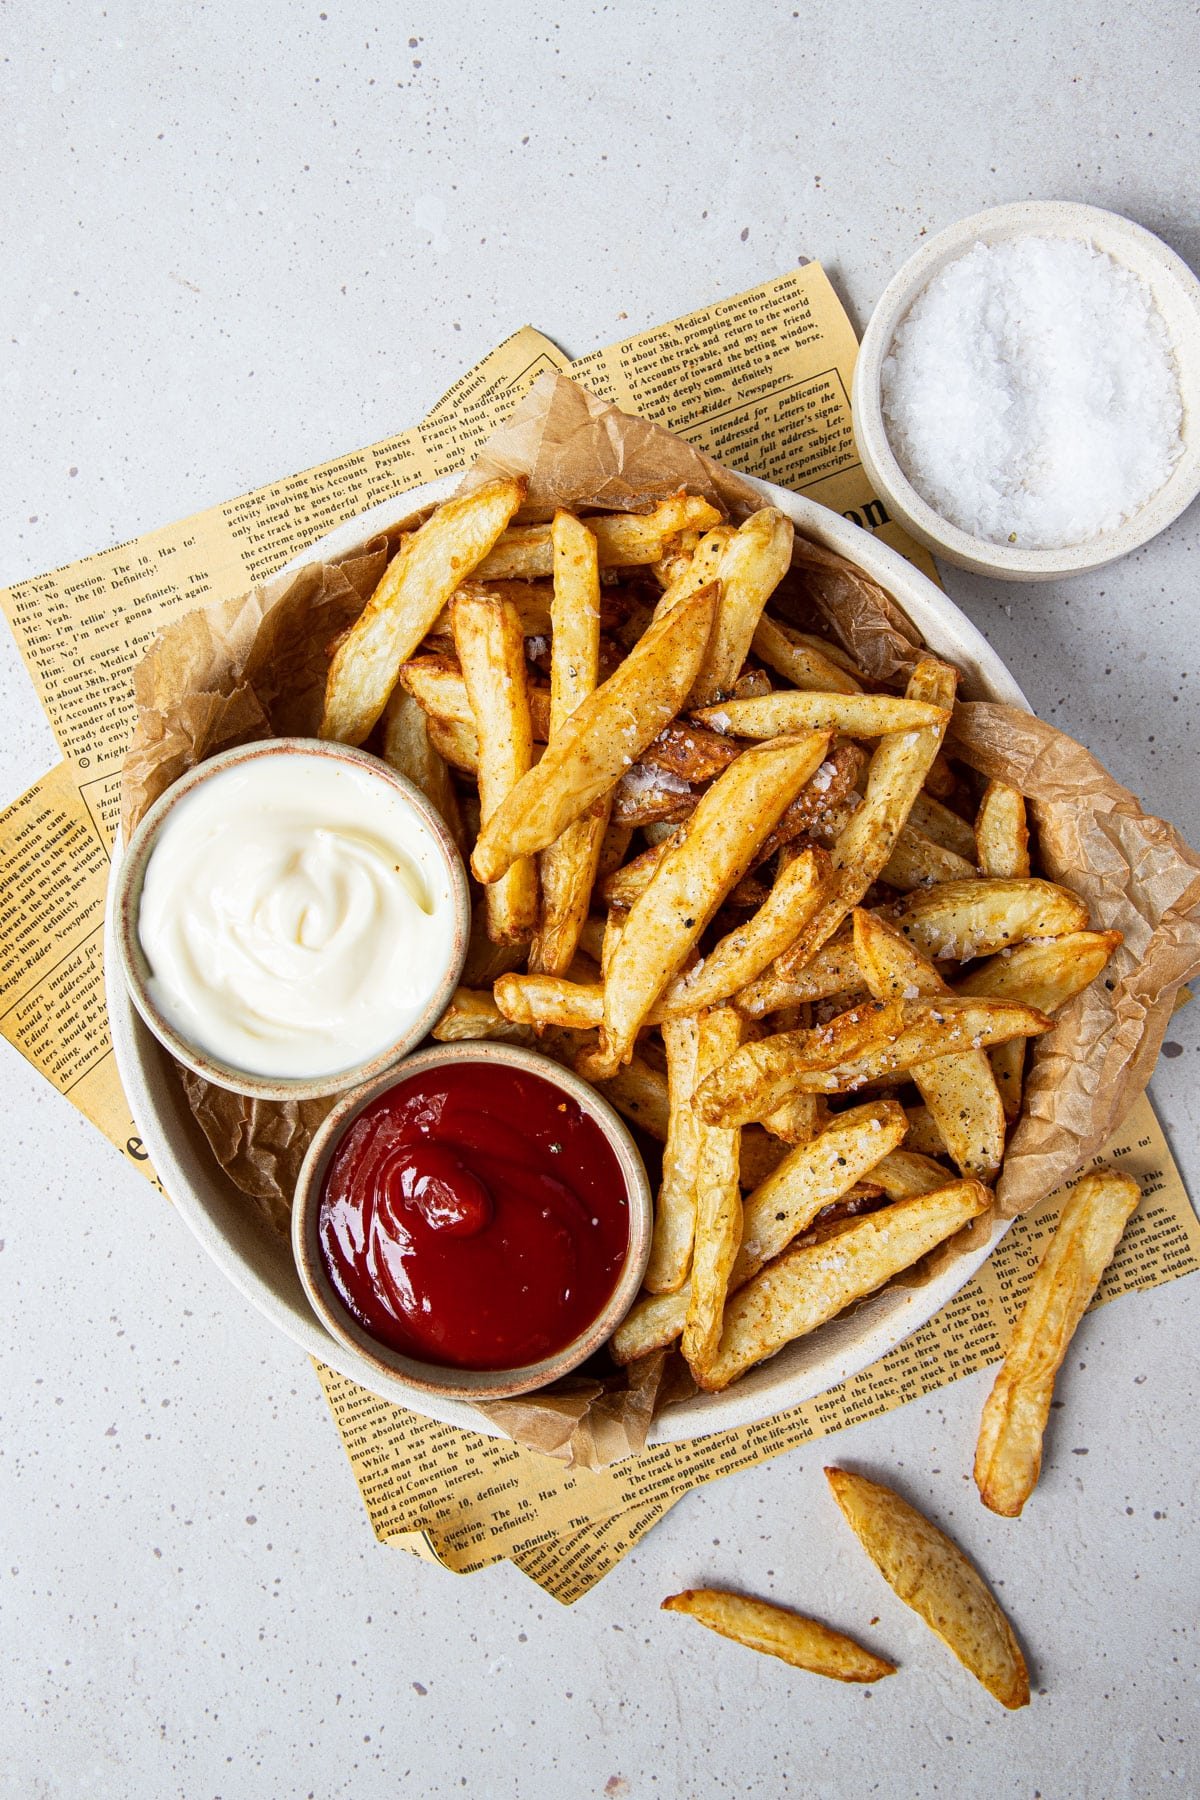 a bowl of chips on a table, with bowls of dipping sauces.